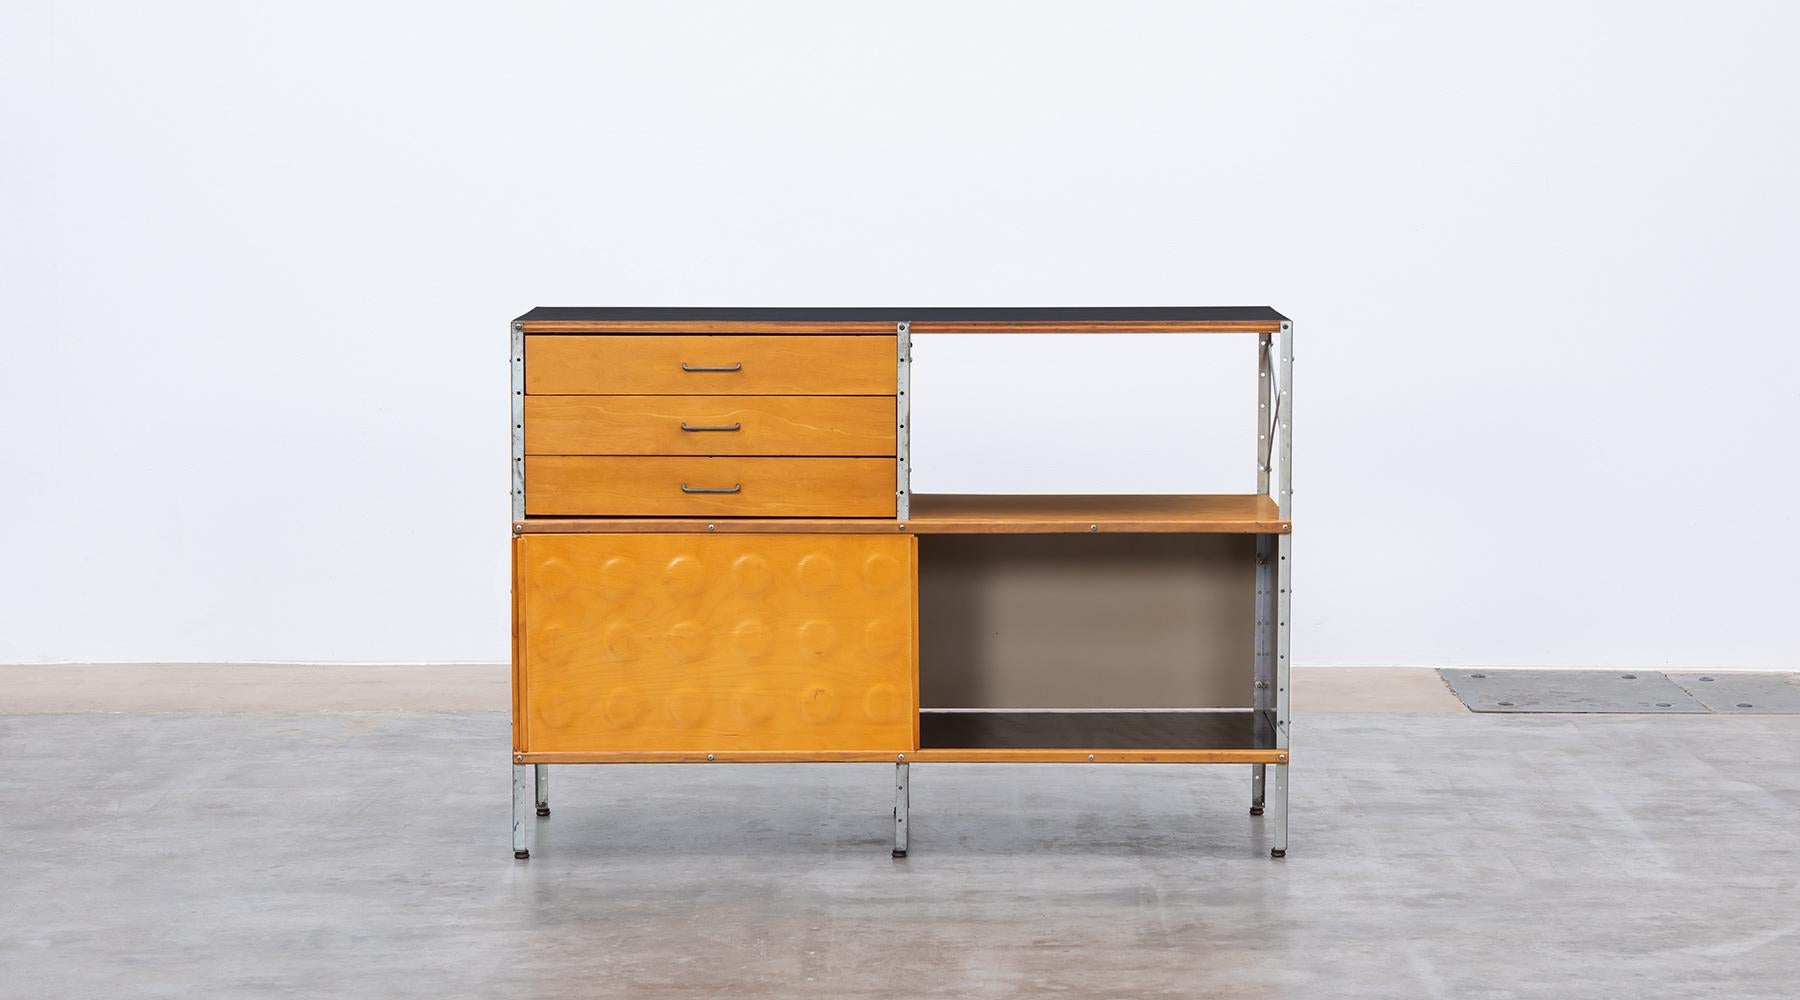 Plywood, laminate, metal, ESU shelf by Ray & Charles Eames, USA, 1949.

ESU shelf, multicolored by Charles and Ray Eames featuring an open area and three drawers in the upper section and two sliding doors in the lower section. The basic colour